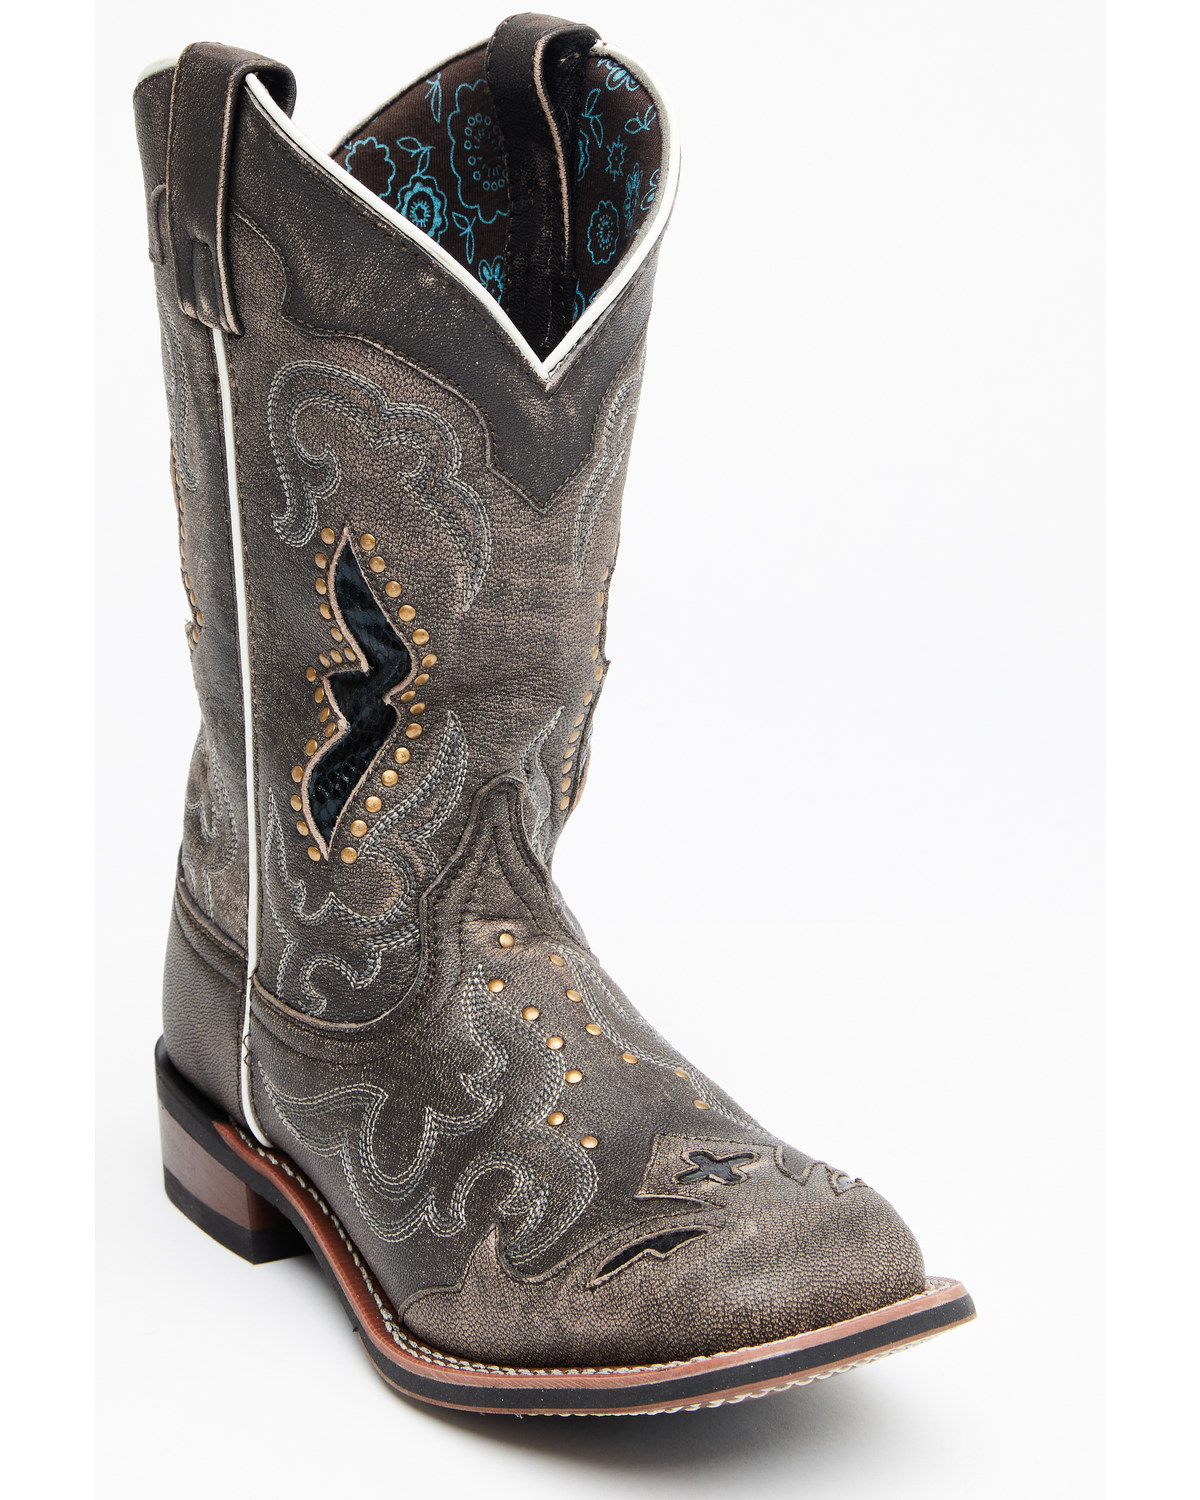 Spellbound Goat Skin Boots | Boot Barn